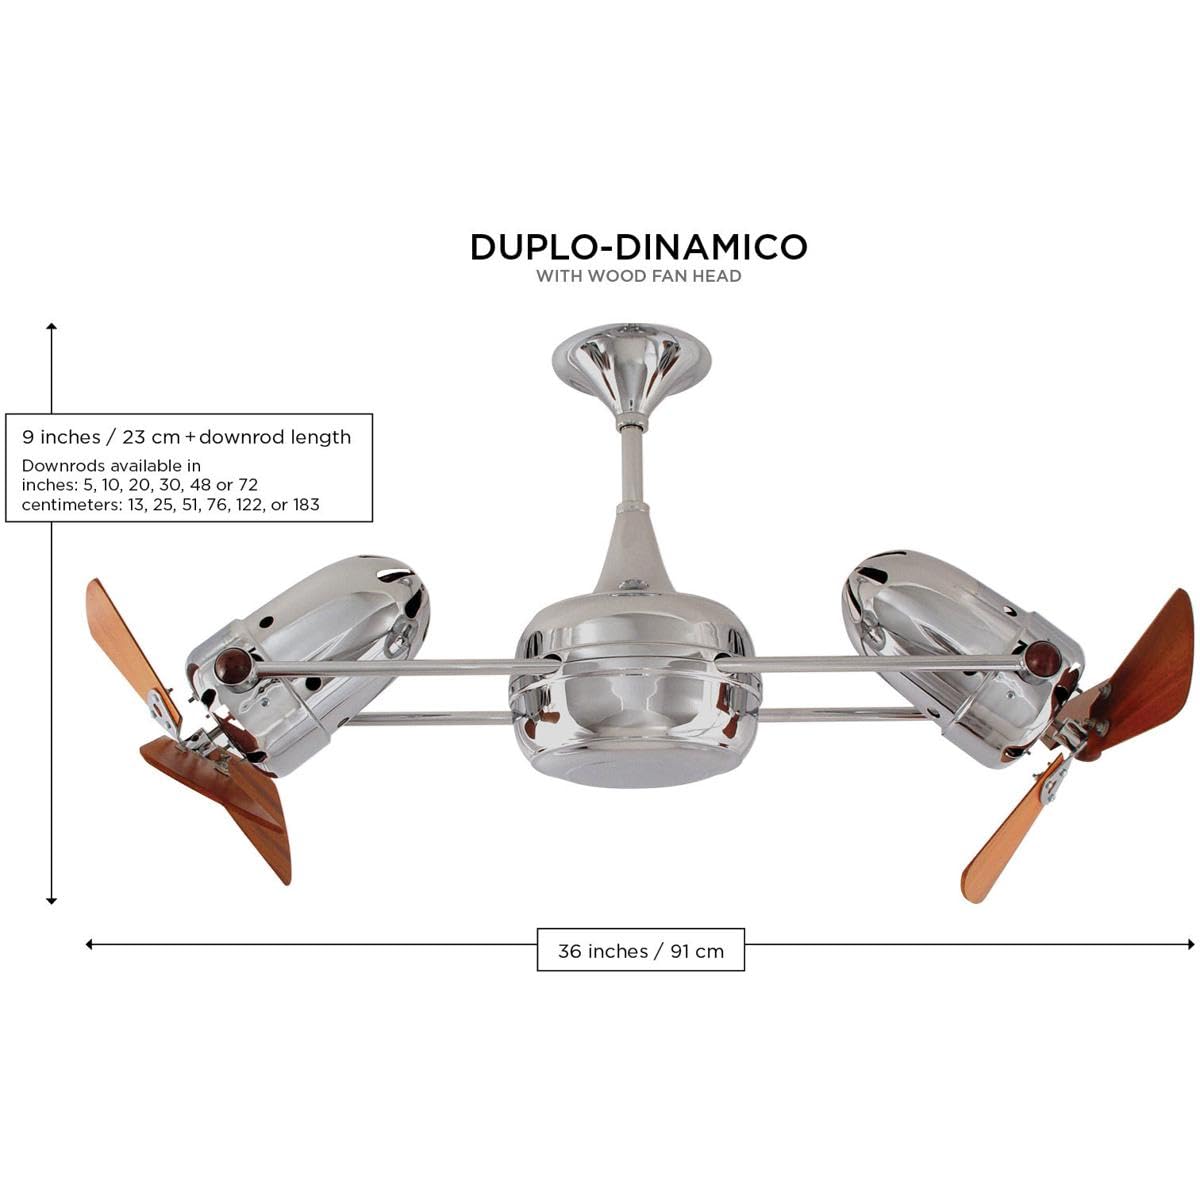 Matthews Fan DD-BN-WD Duplo Dinamico 360” rotational dual head ceiling fan in Brushed Nickel finish with solid sustainable mahogany wood blades.